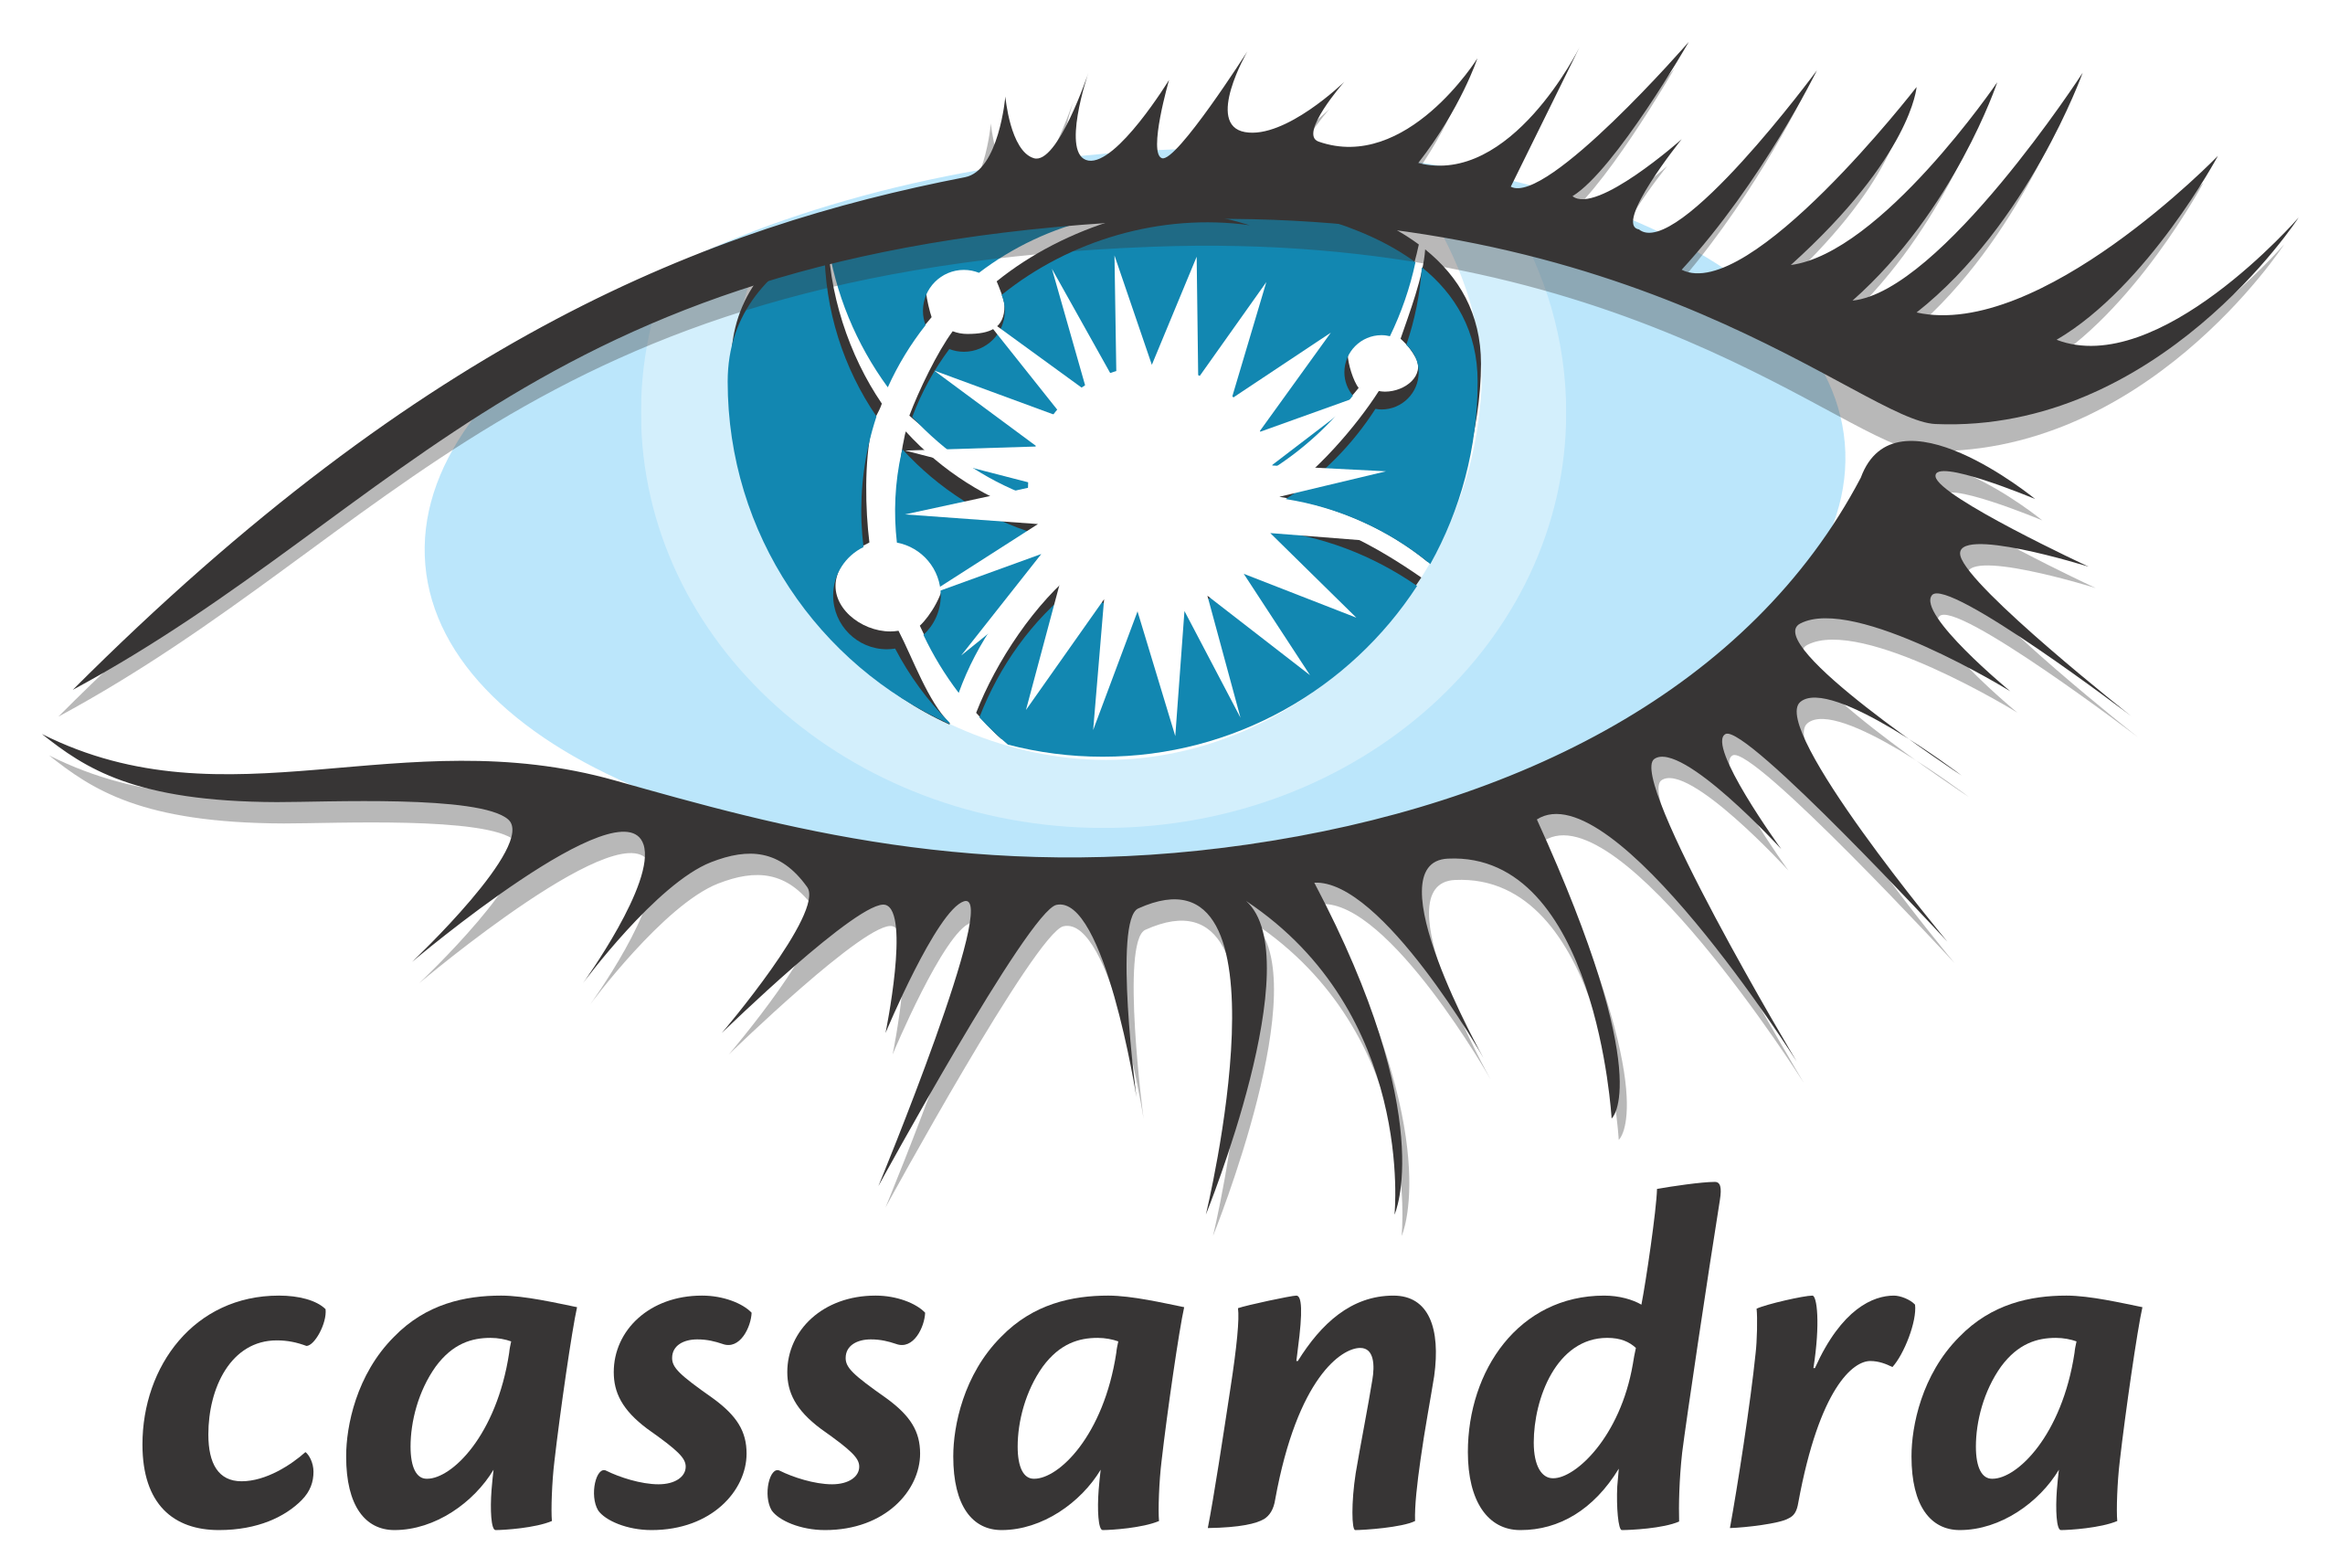 How to Install Cassandra on Fedora 38 - Featured